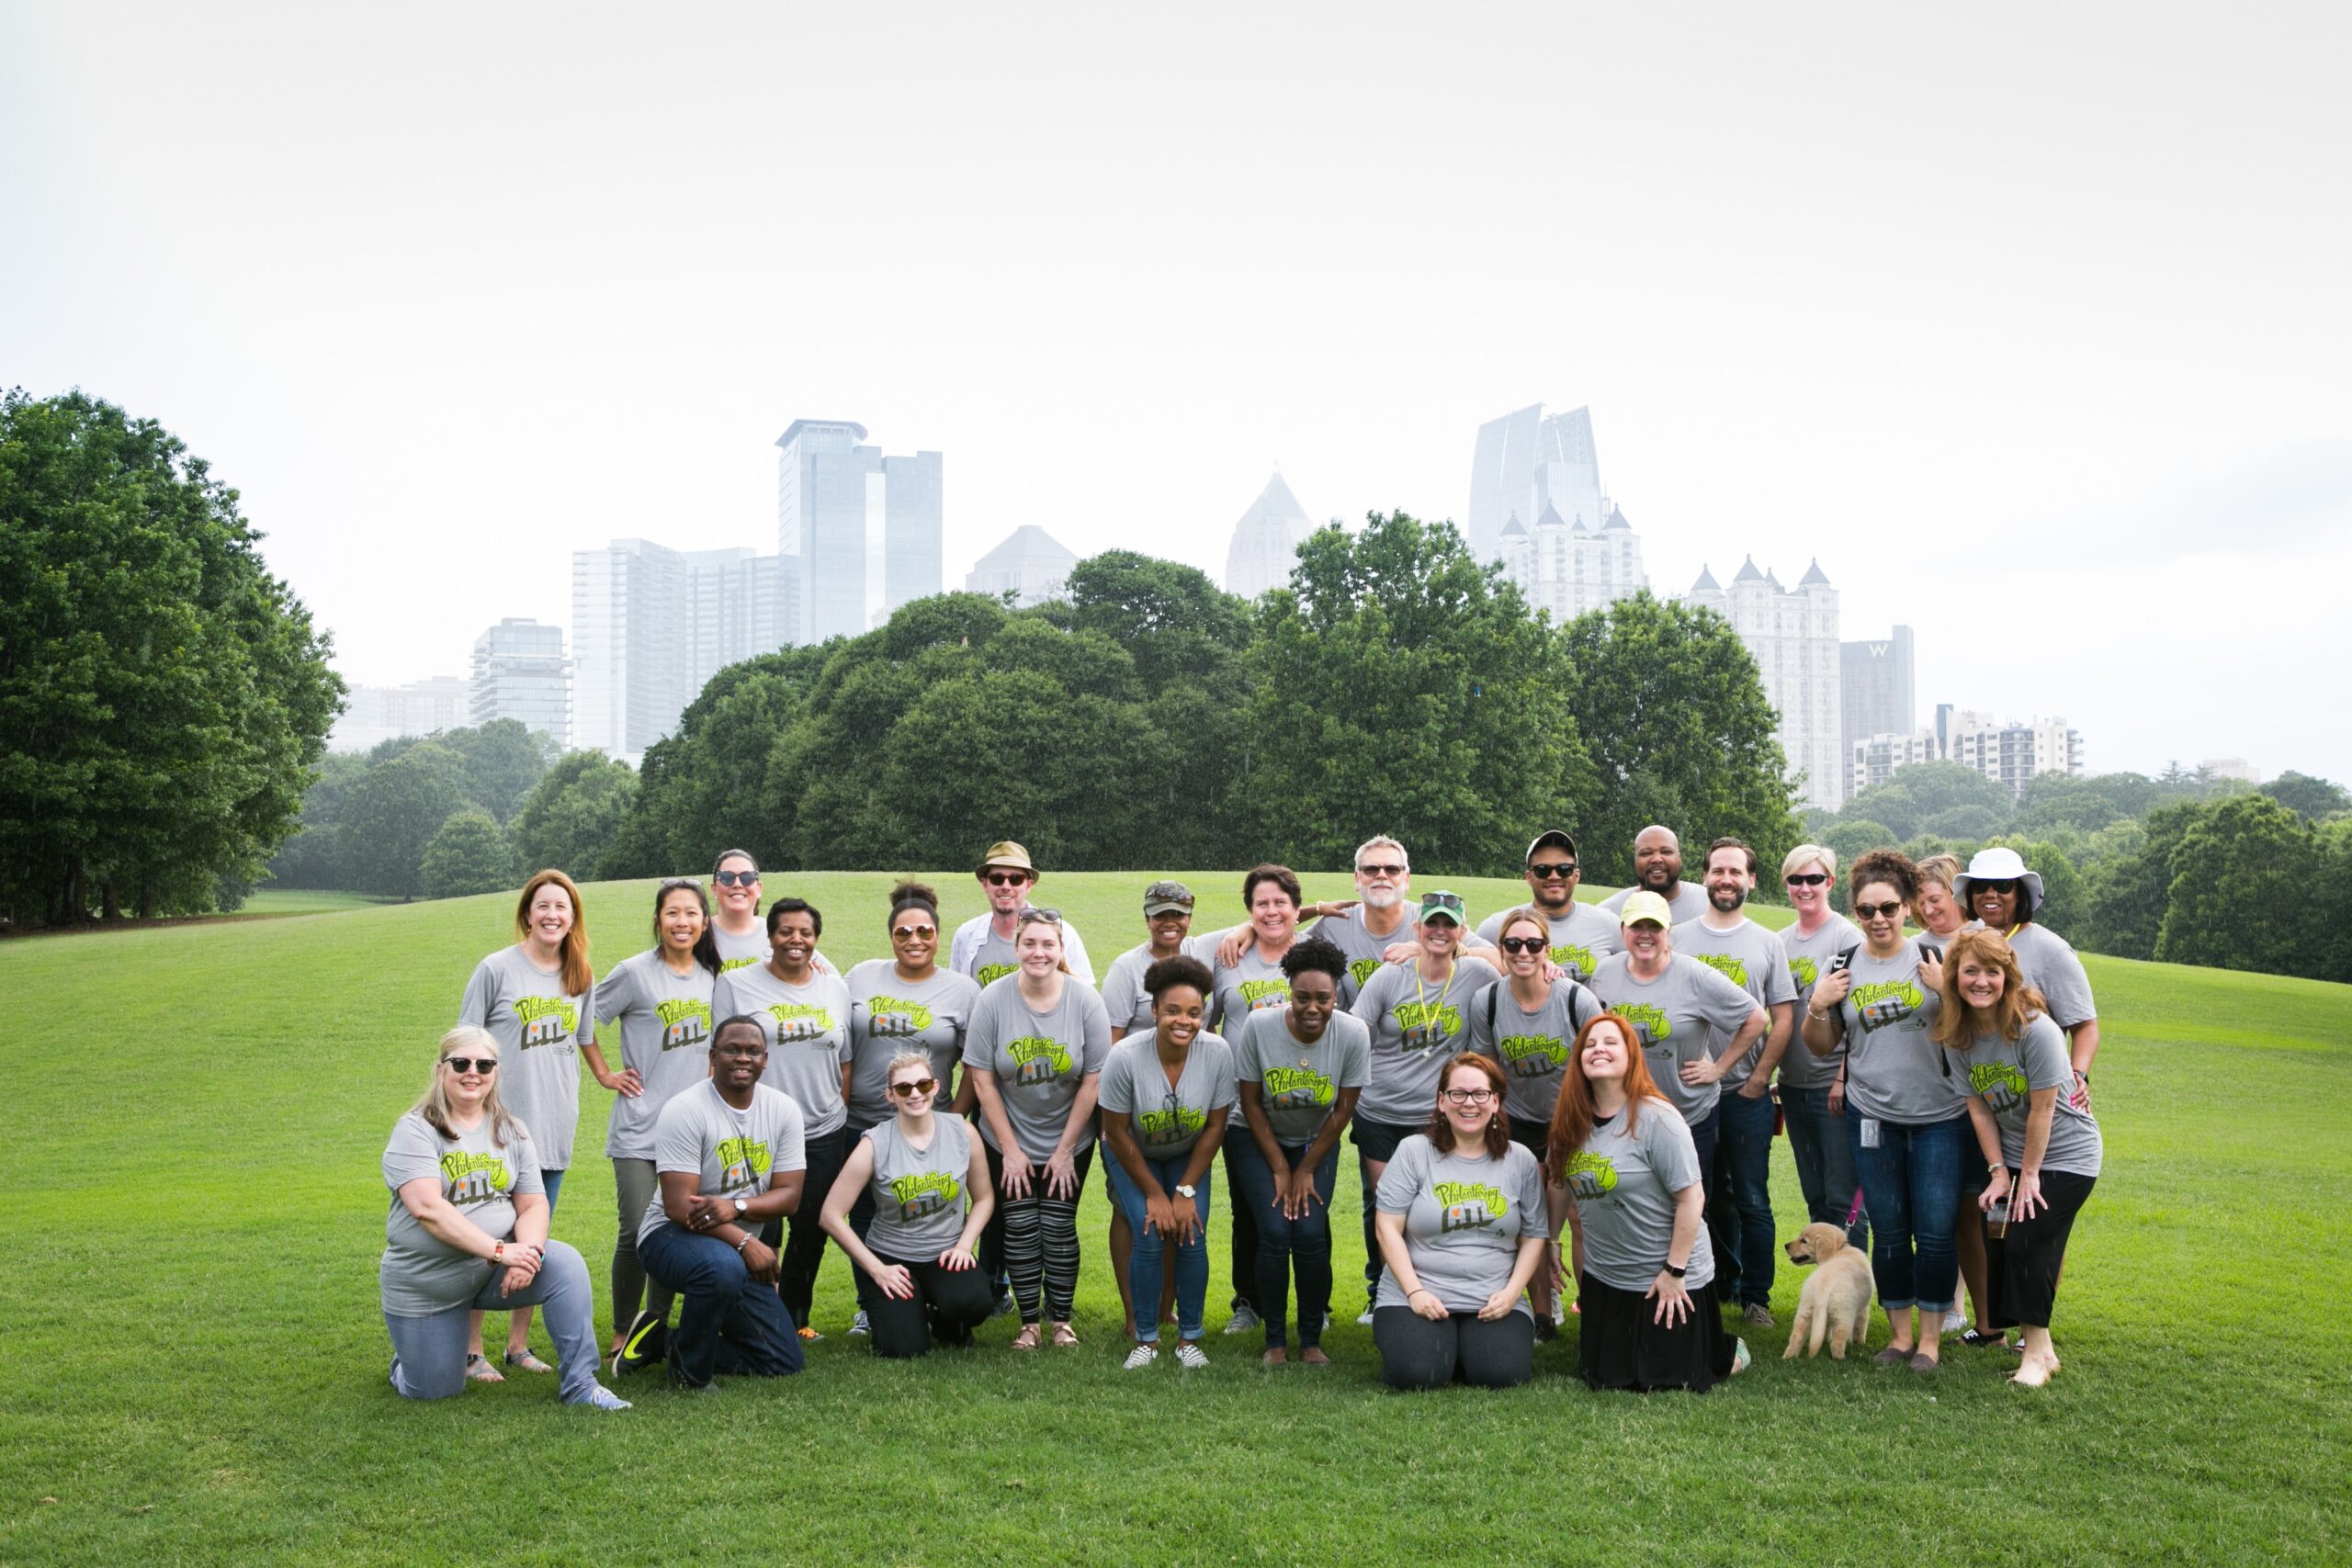 Featured image for “Community Foundation team picnic in Piedmont Park”